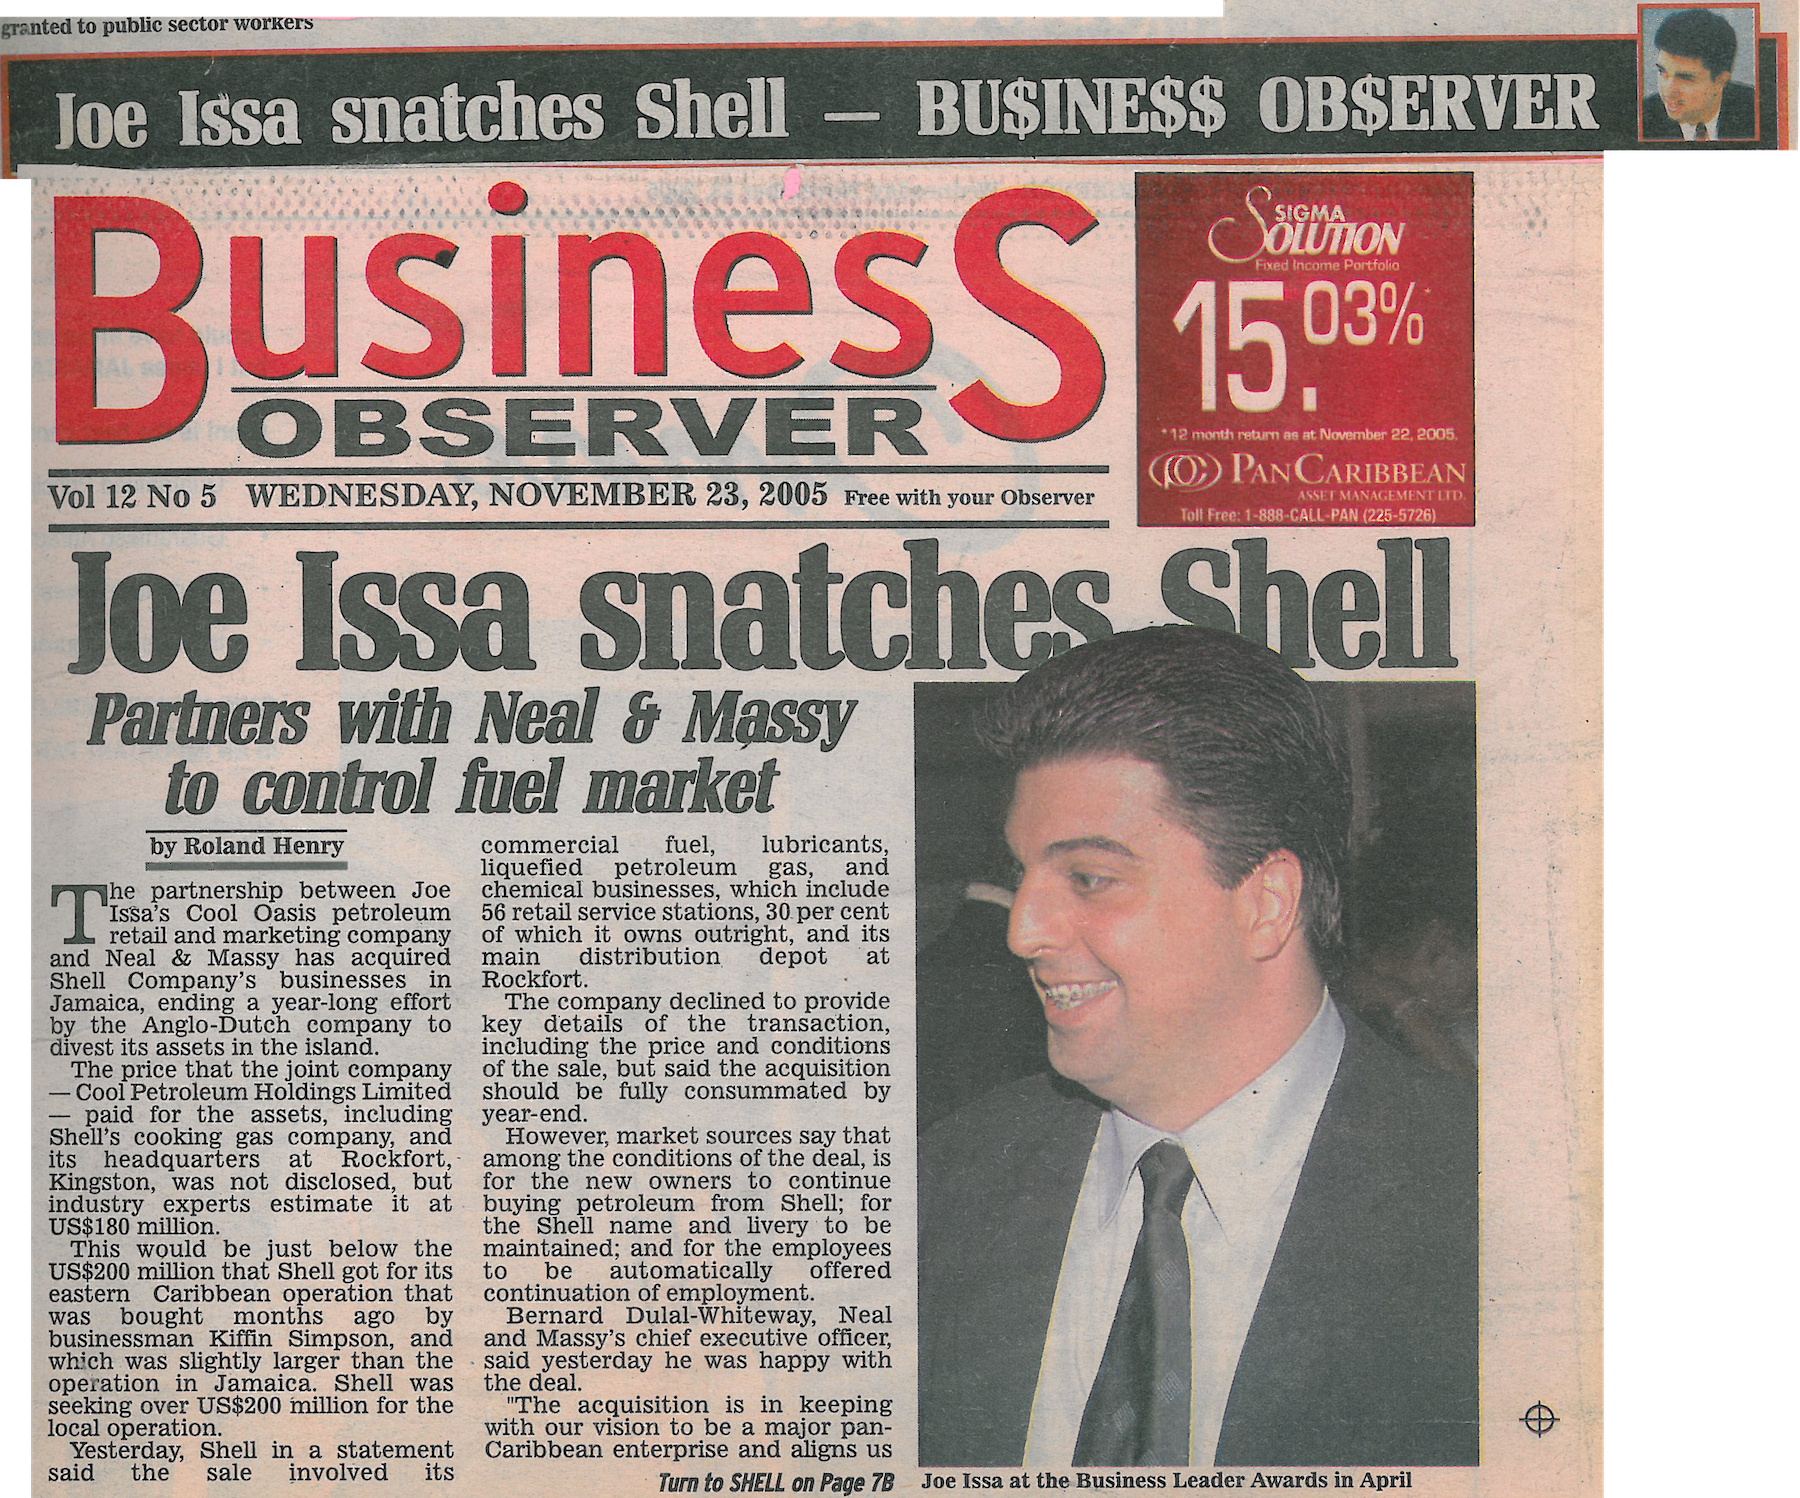 Joe Issa snatches Shell: Partners with Neal & Massy to control fuel market